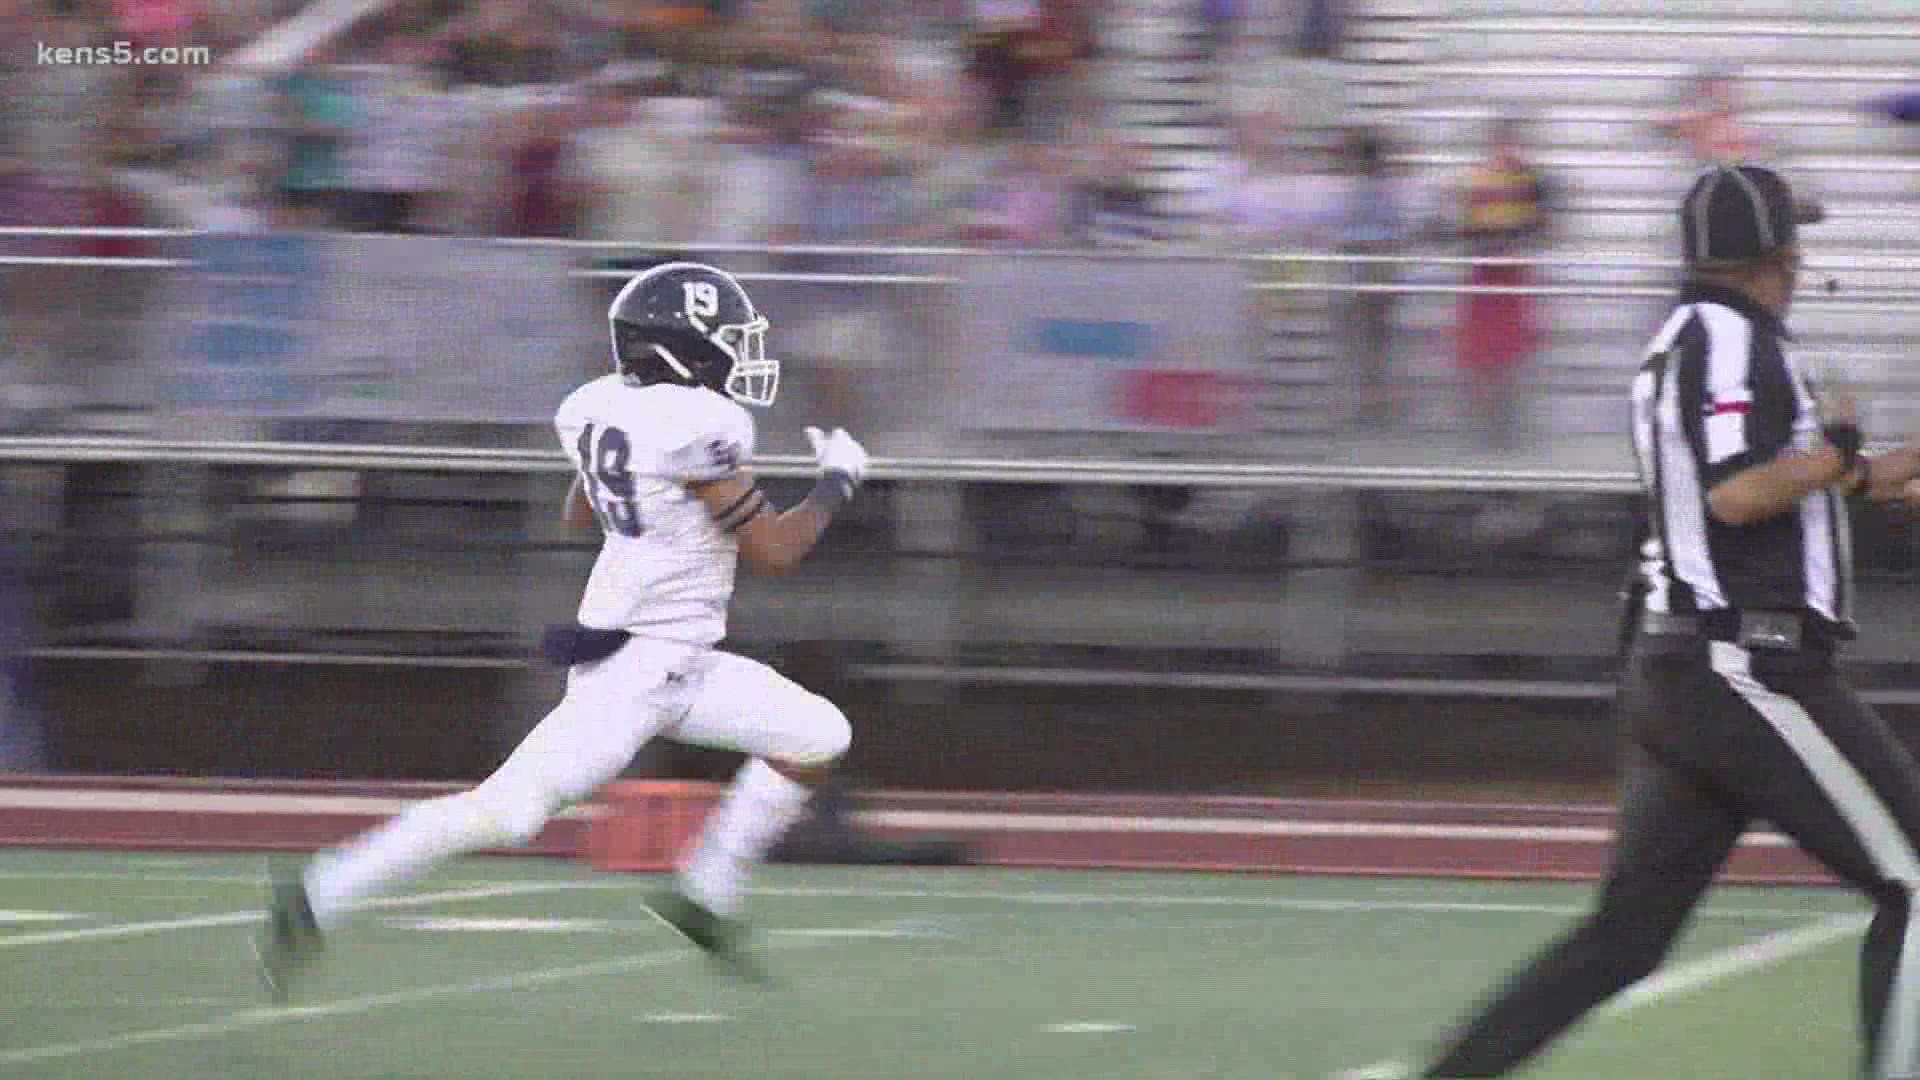 Clark blanked Churchill to kick off Week 5 with a victory.